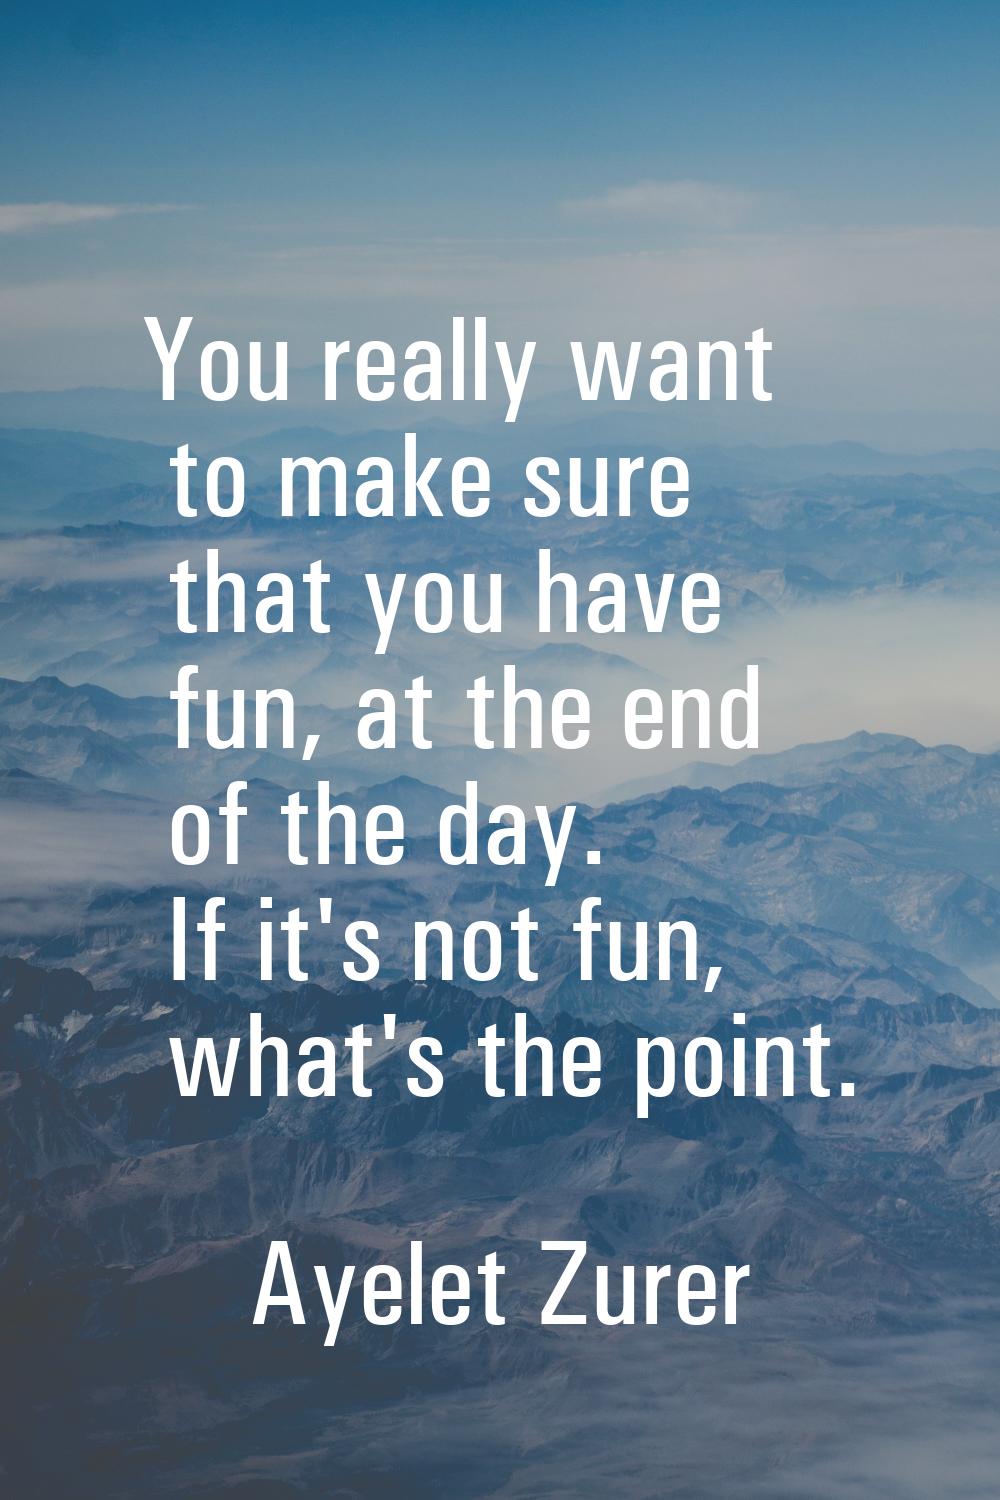 You really want to make sure that you have fun, at the end of the day. If it's not fun, what's the 